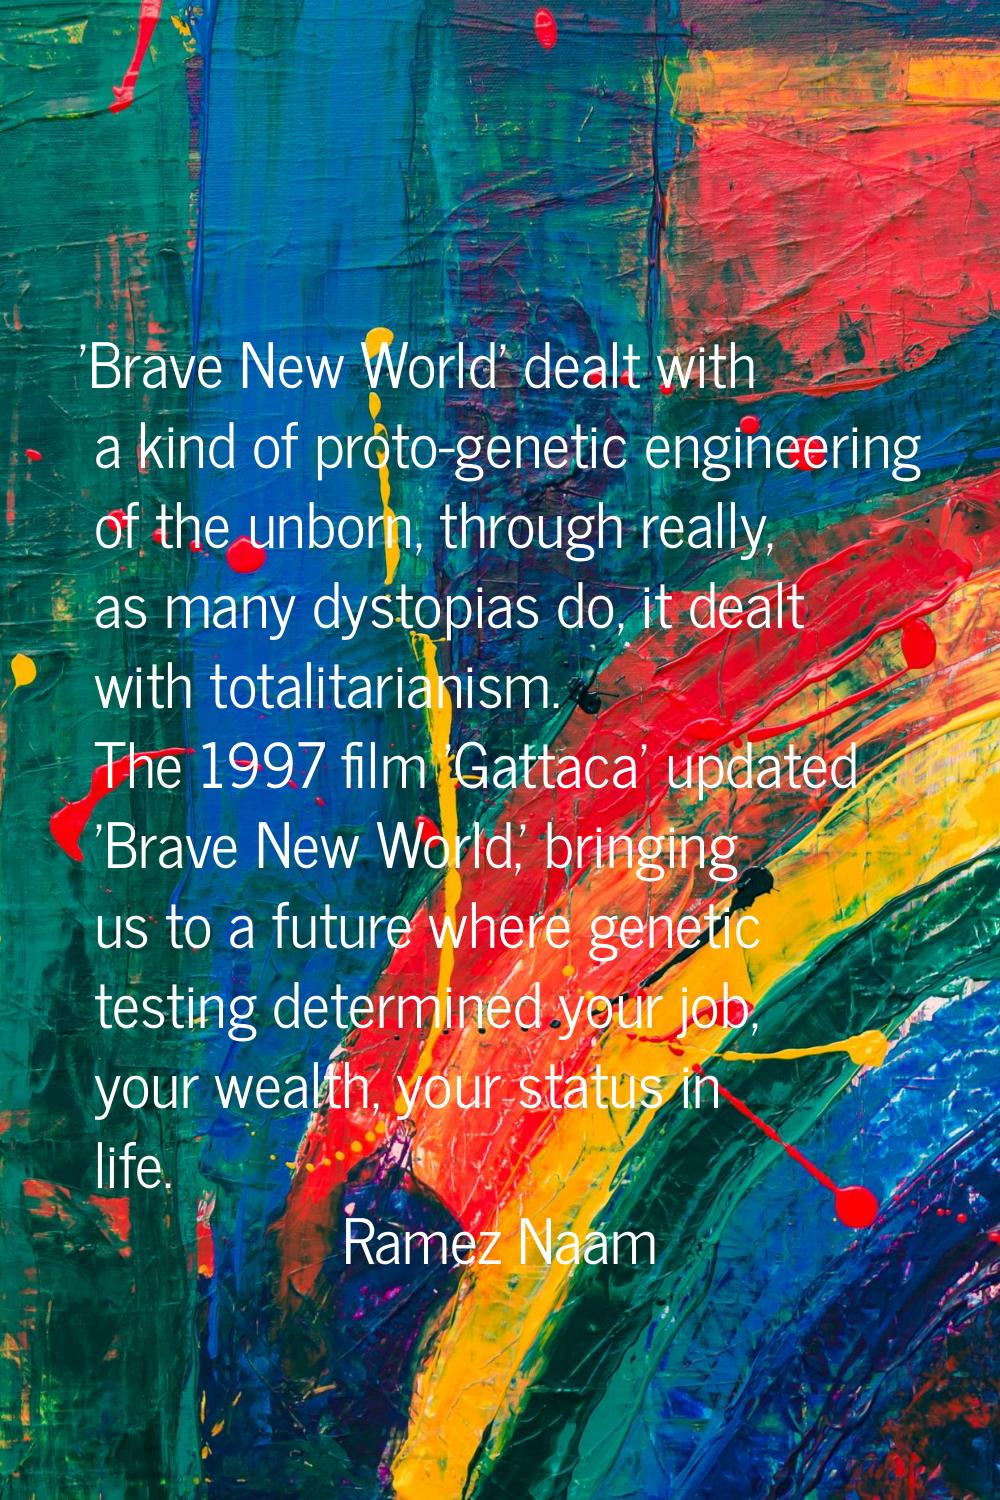 'Brave New World' dealt with a kind of proto-genetic engineering of the unborn, through really, as 